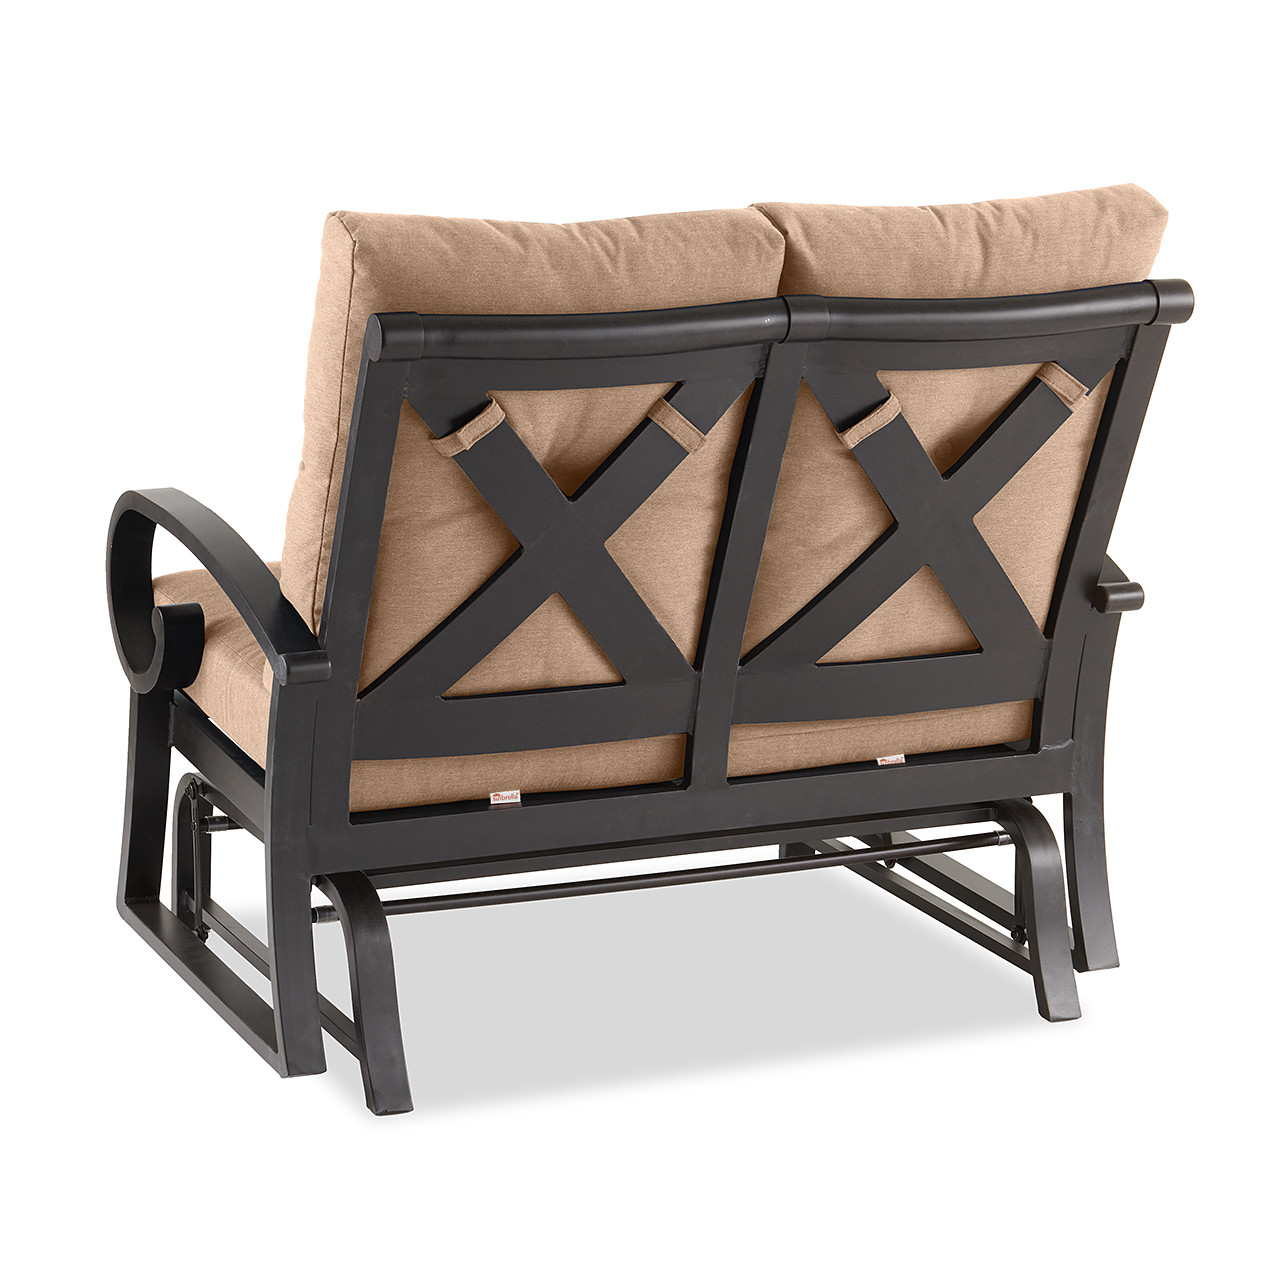 Solstice Aged Bronze Aluminum with Cushions Loveseat Glider